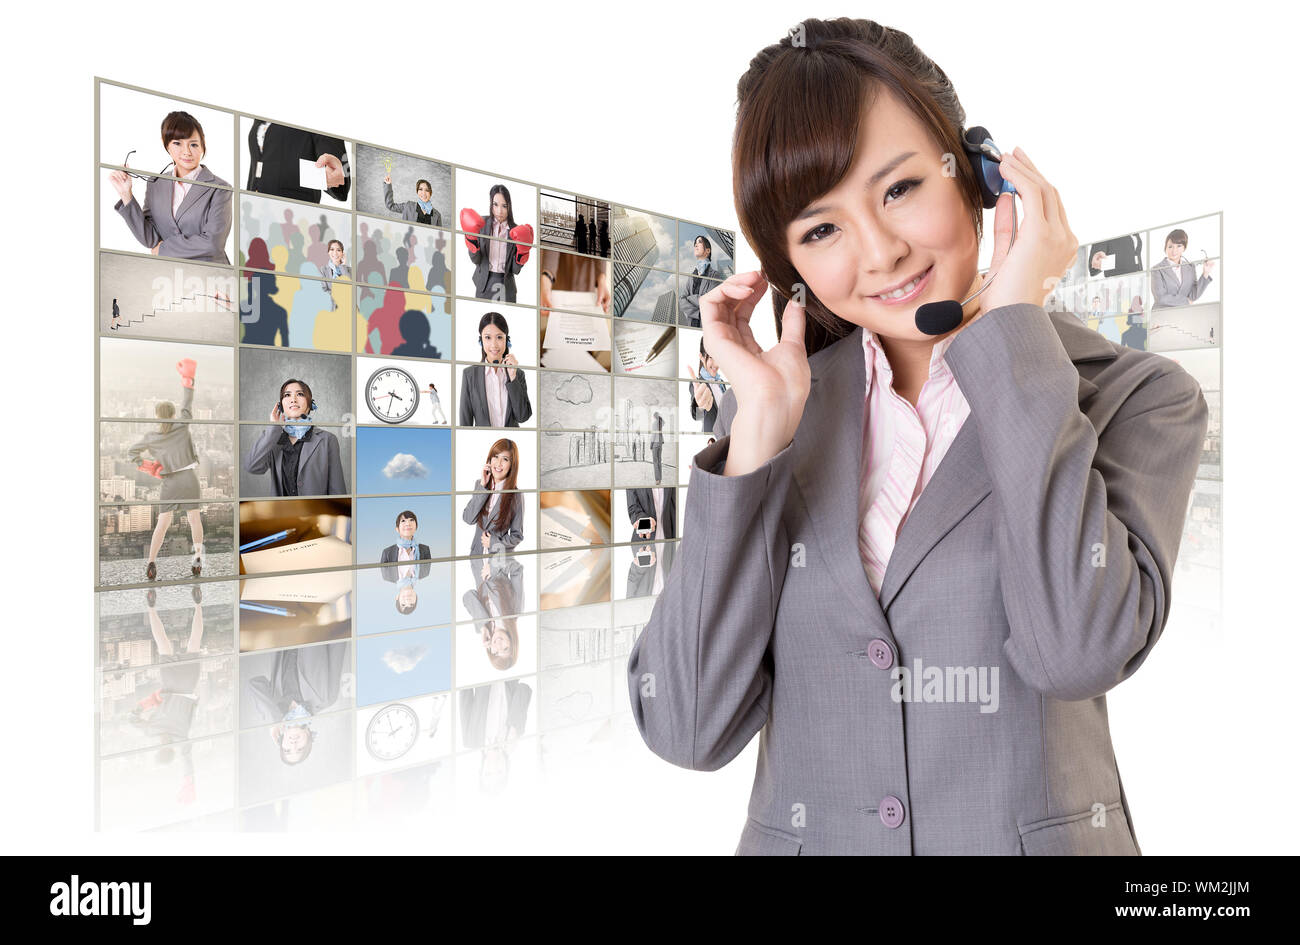 Business woman with headphone standing in front of TV screen wall. Stock Photo